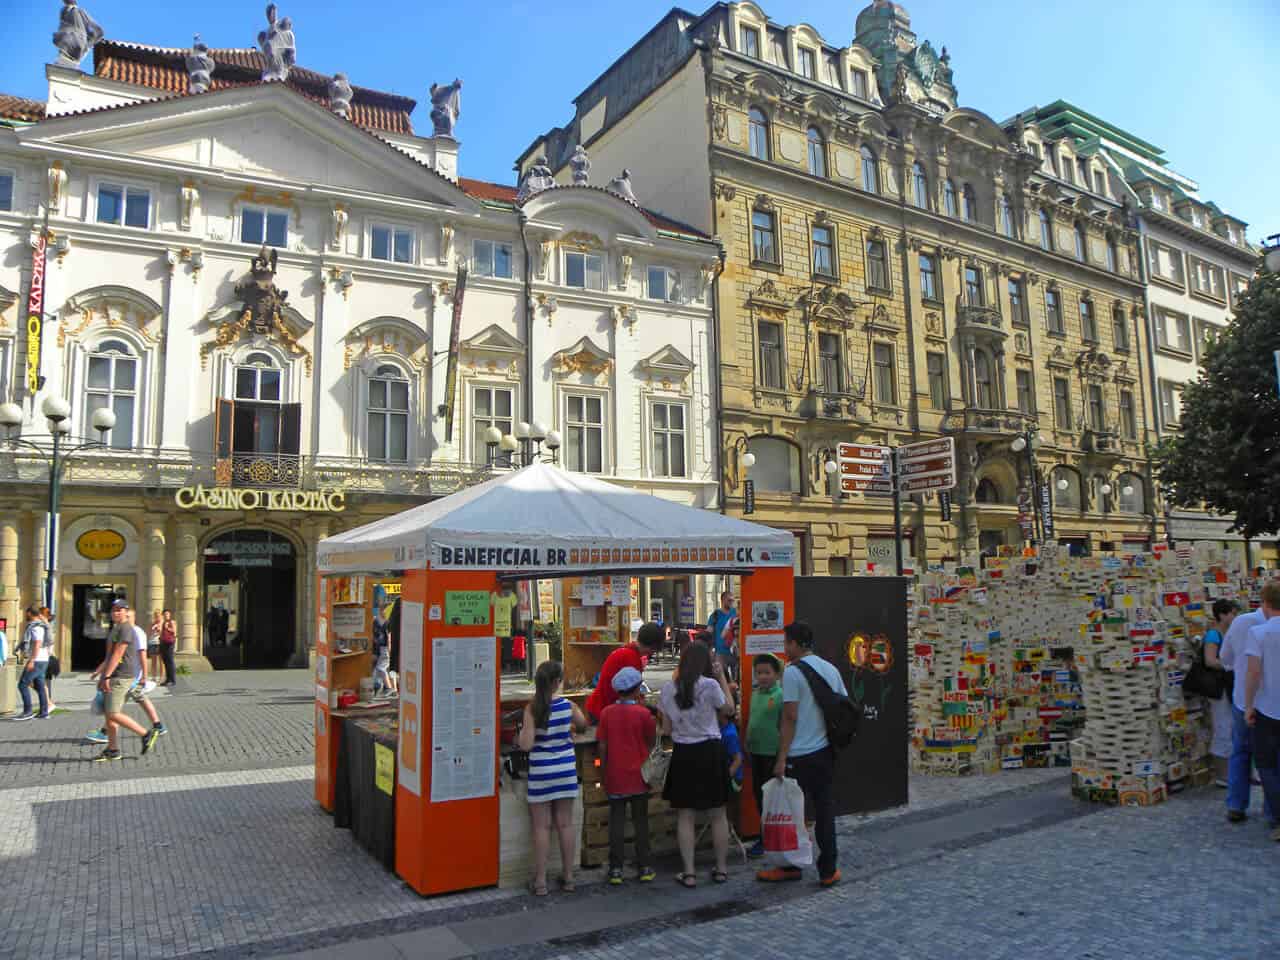 Things to consider when choosing a guide in Prague